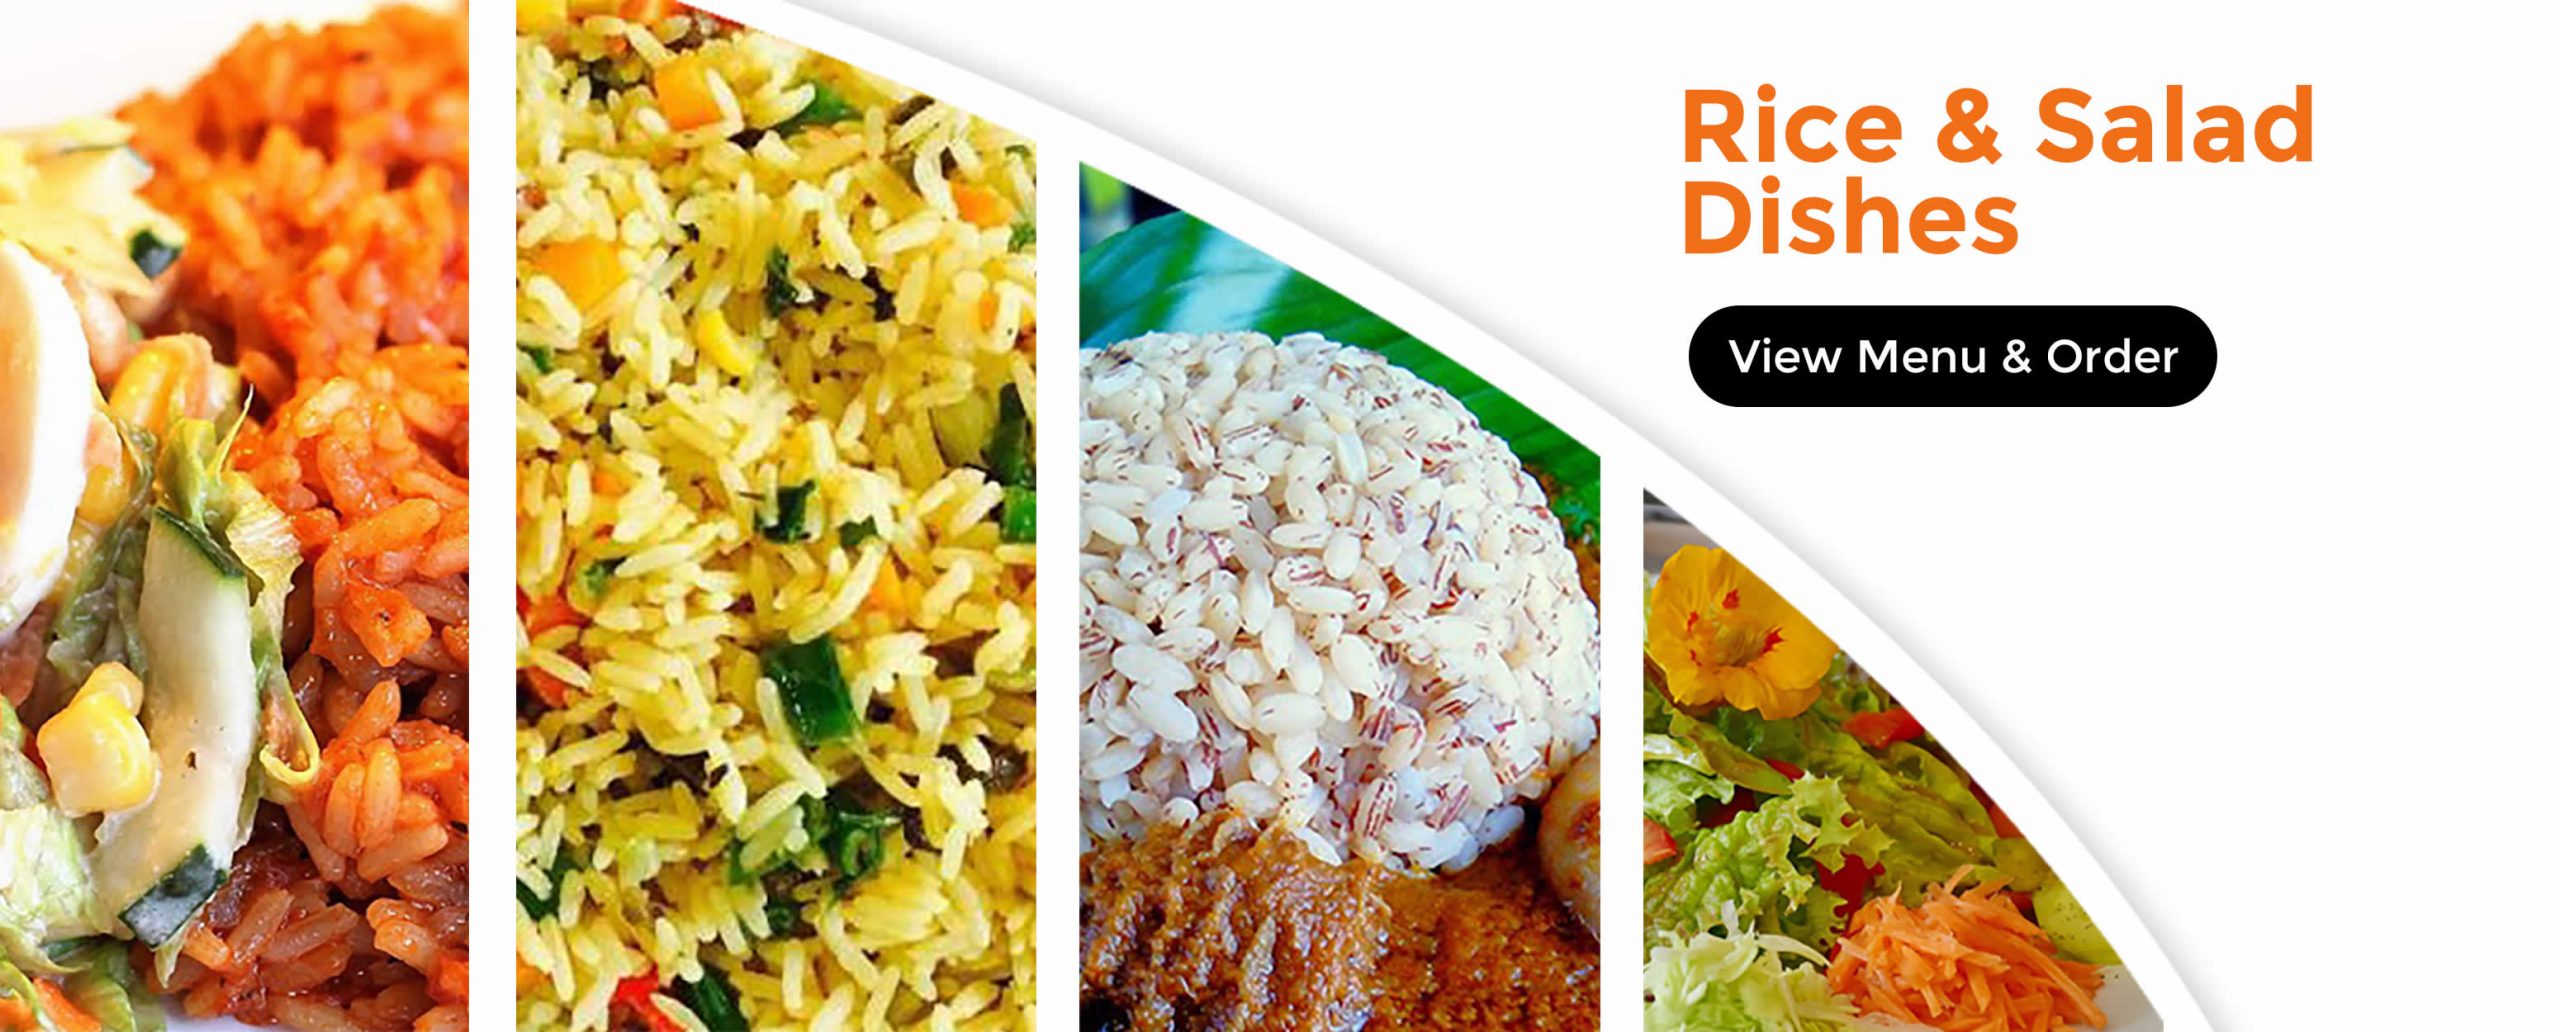 Rice Dishes in Frederick Maryland, USA | TinaDelice